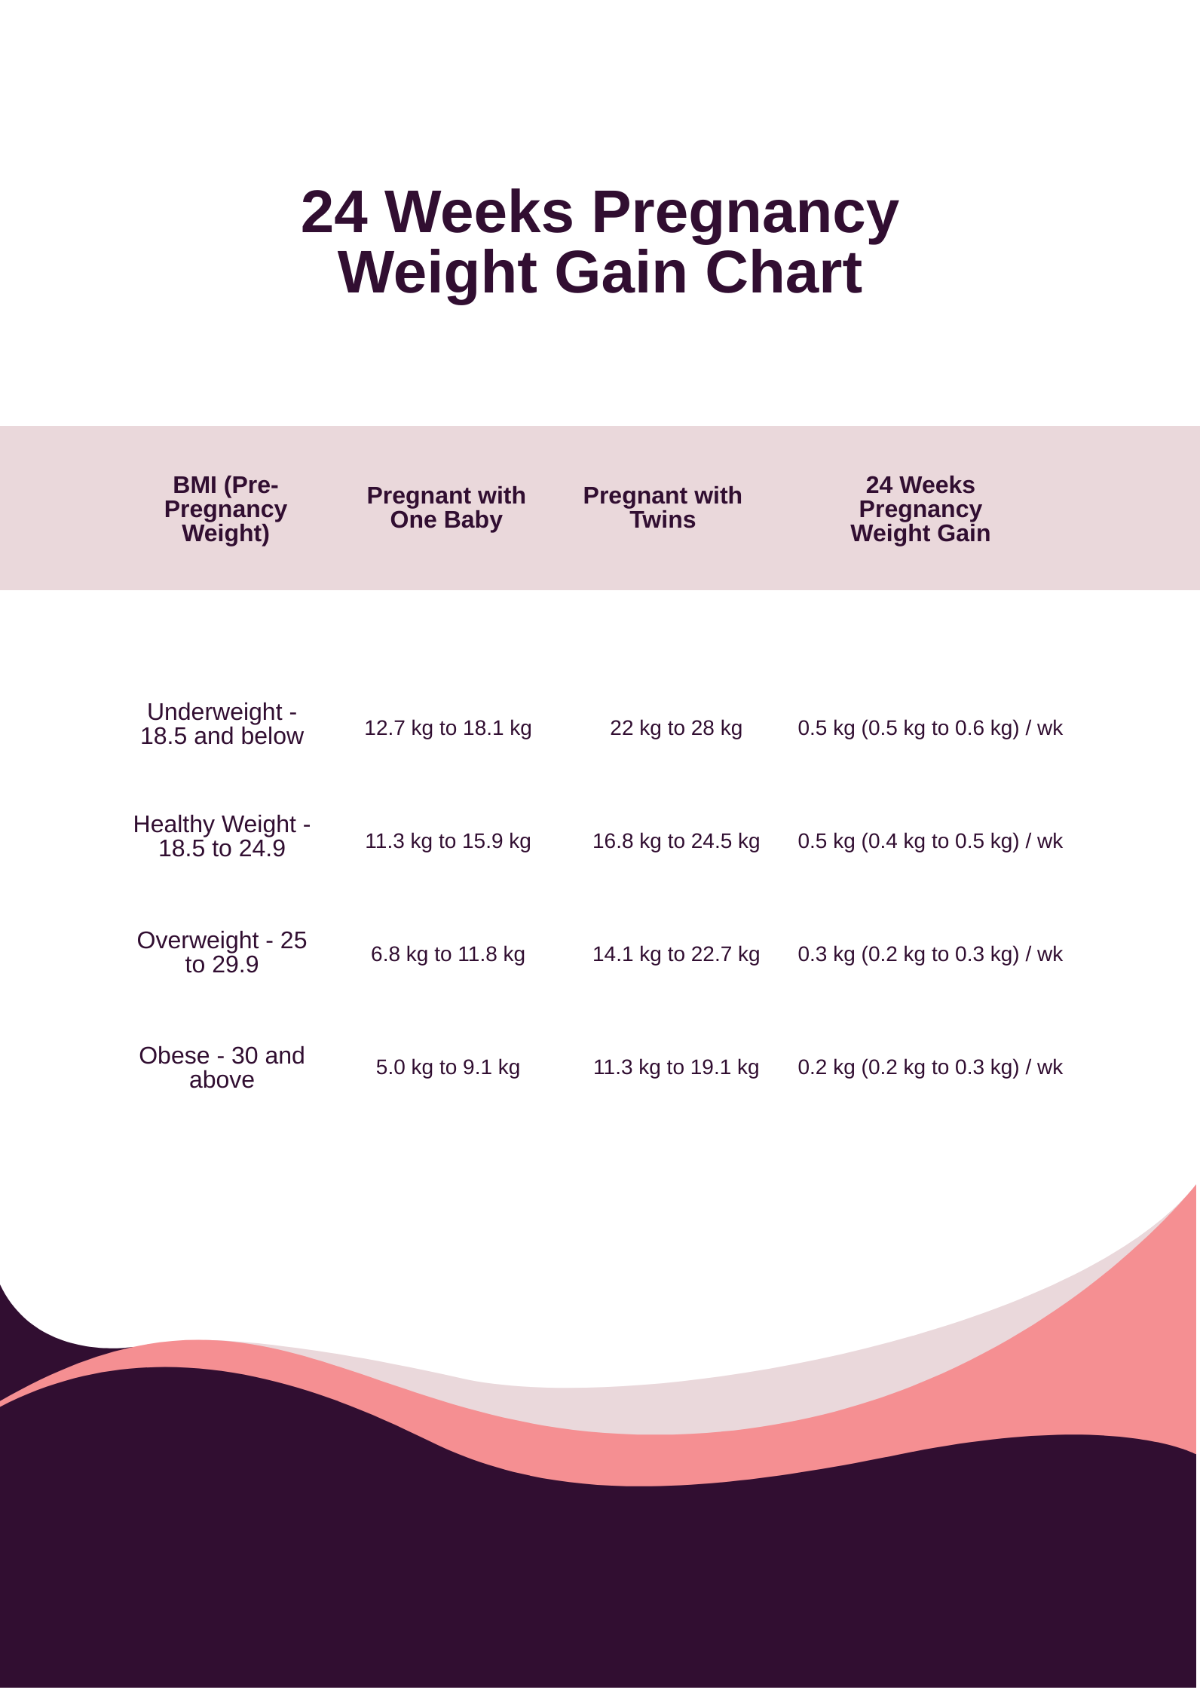 24 Weeks Pregnancy Weight Gain Chart Template